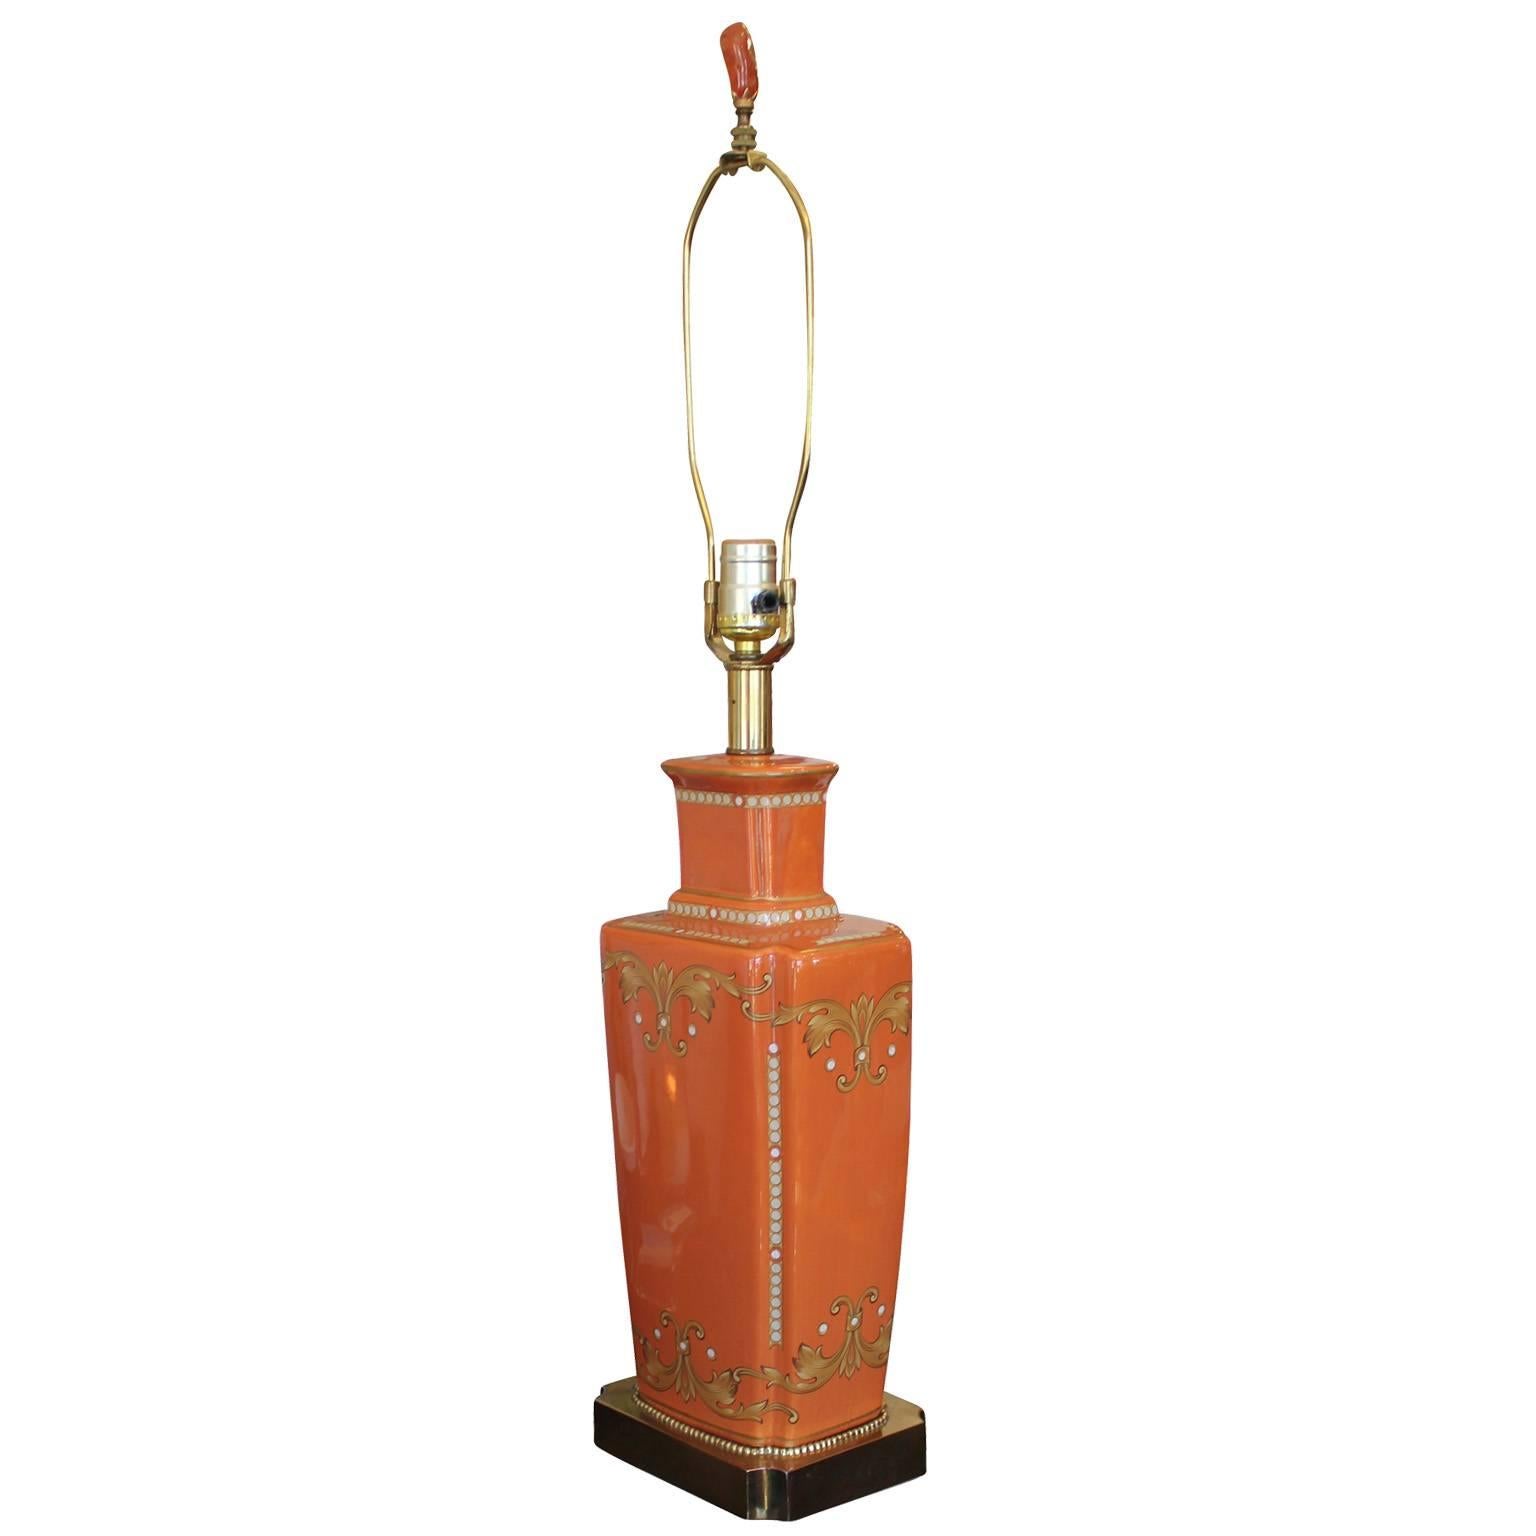 Hollywood Regency Pair of Vintage Orange Lamps with Shiny Brass and Amber Accents